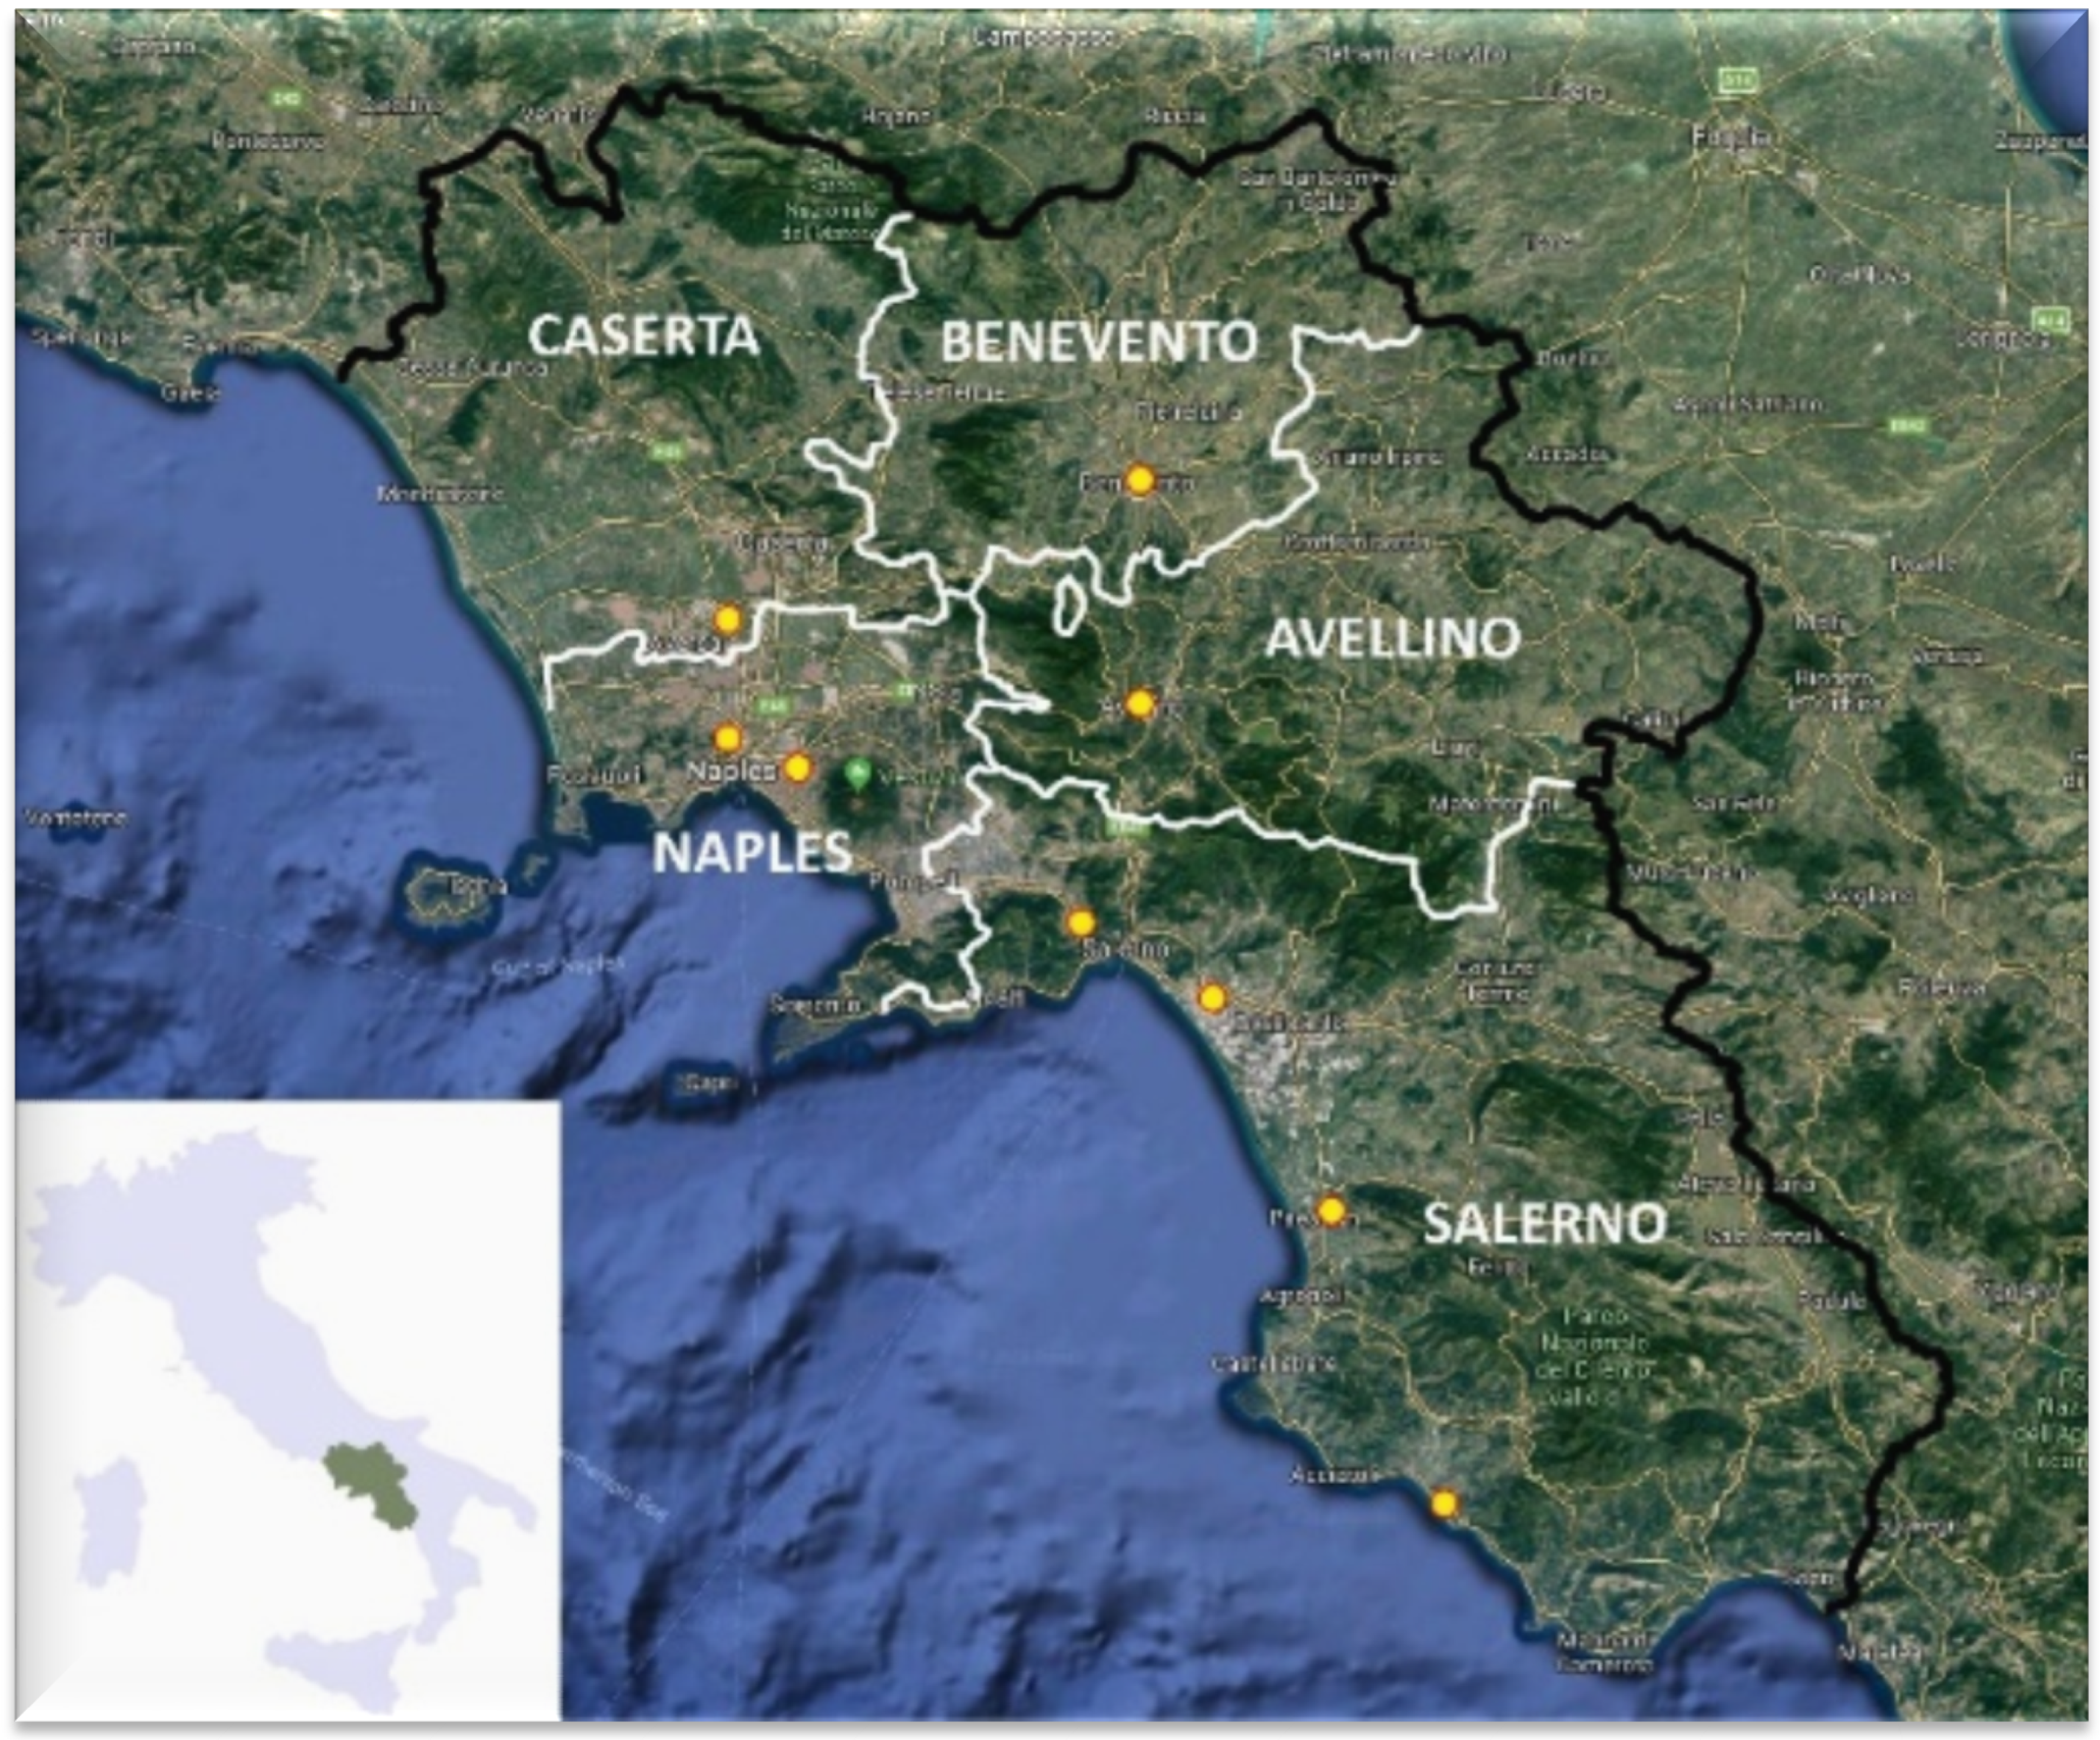 Agriculture | Free Full-Text | Edible Green Infrastructure for Urban  Regeneration and Food Security: Case Studies from the Campania Region | HTML